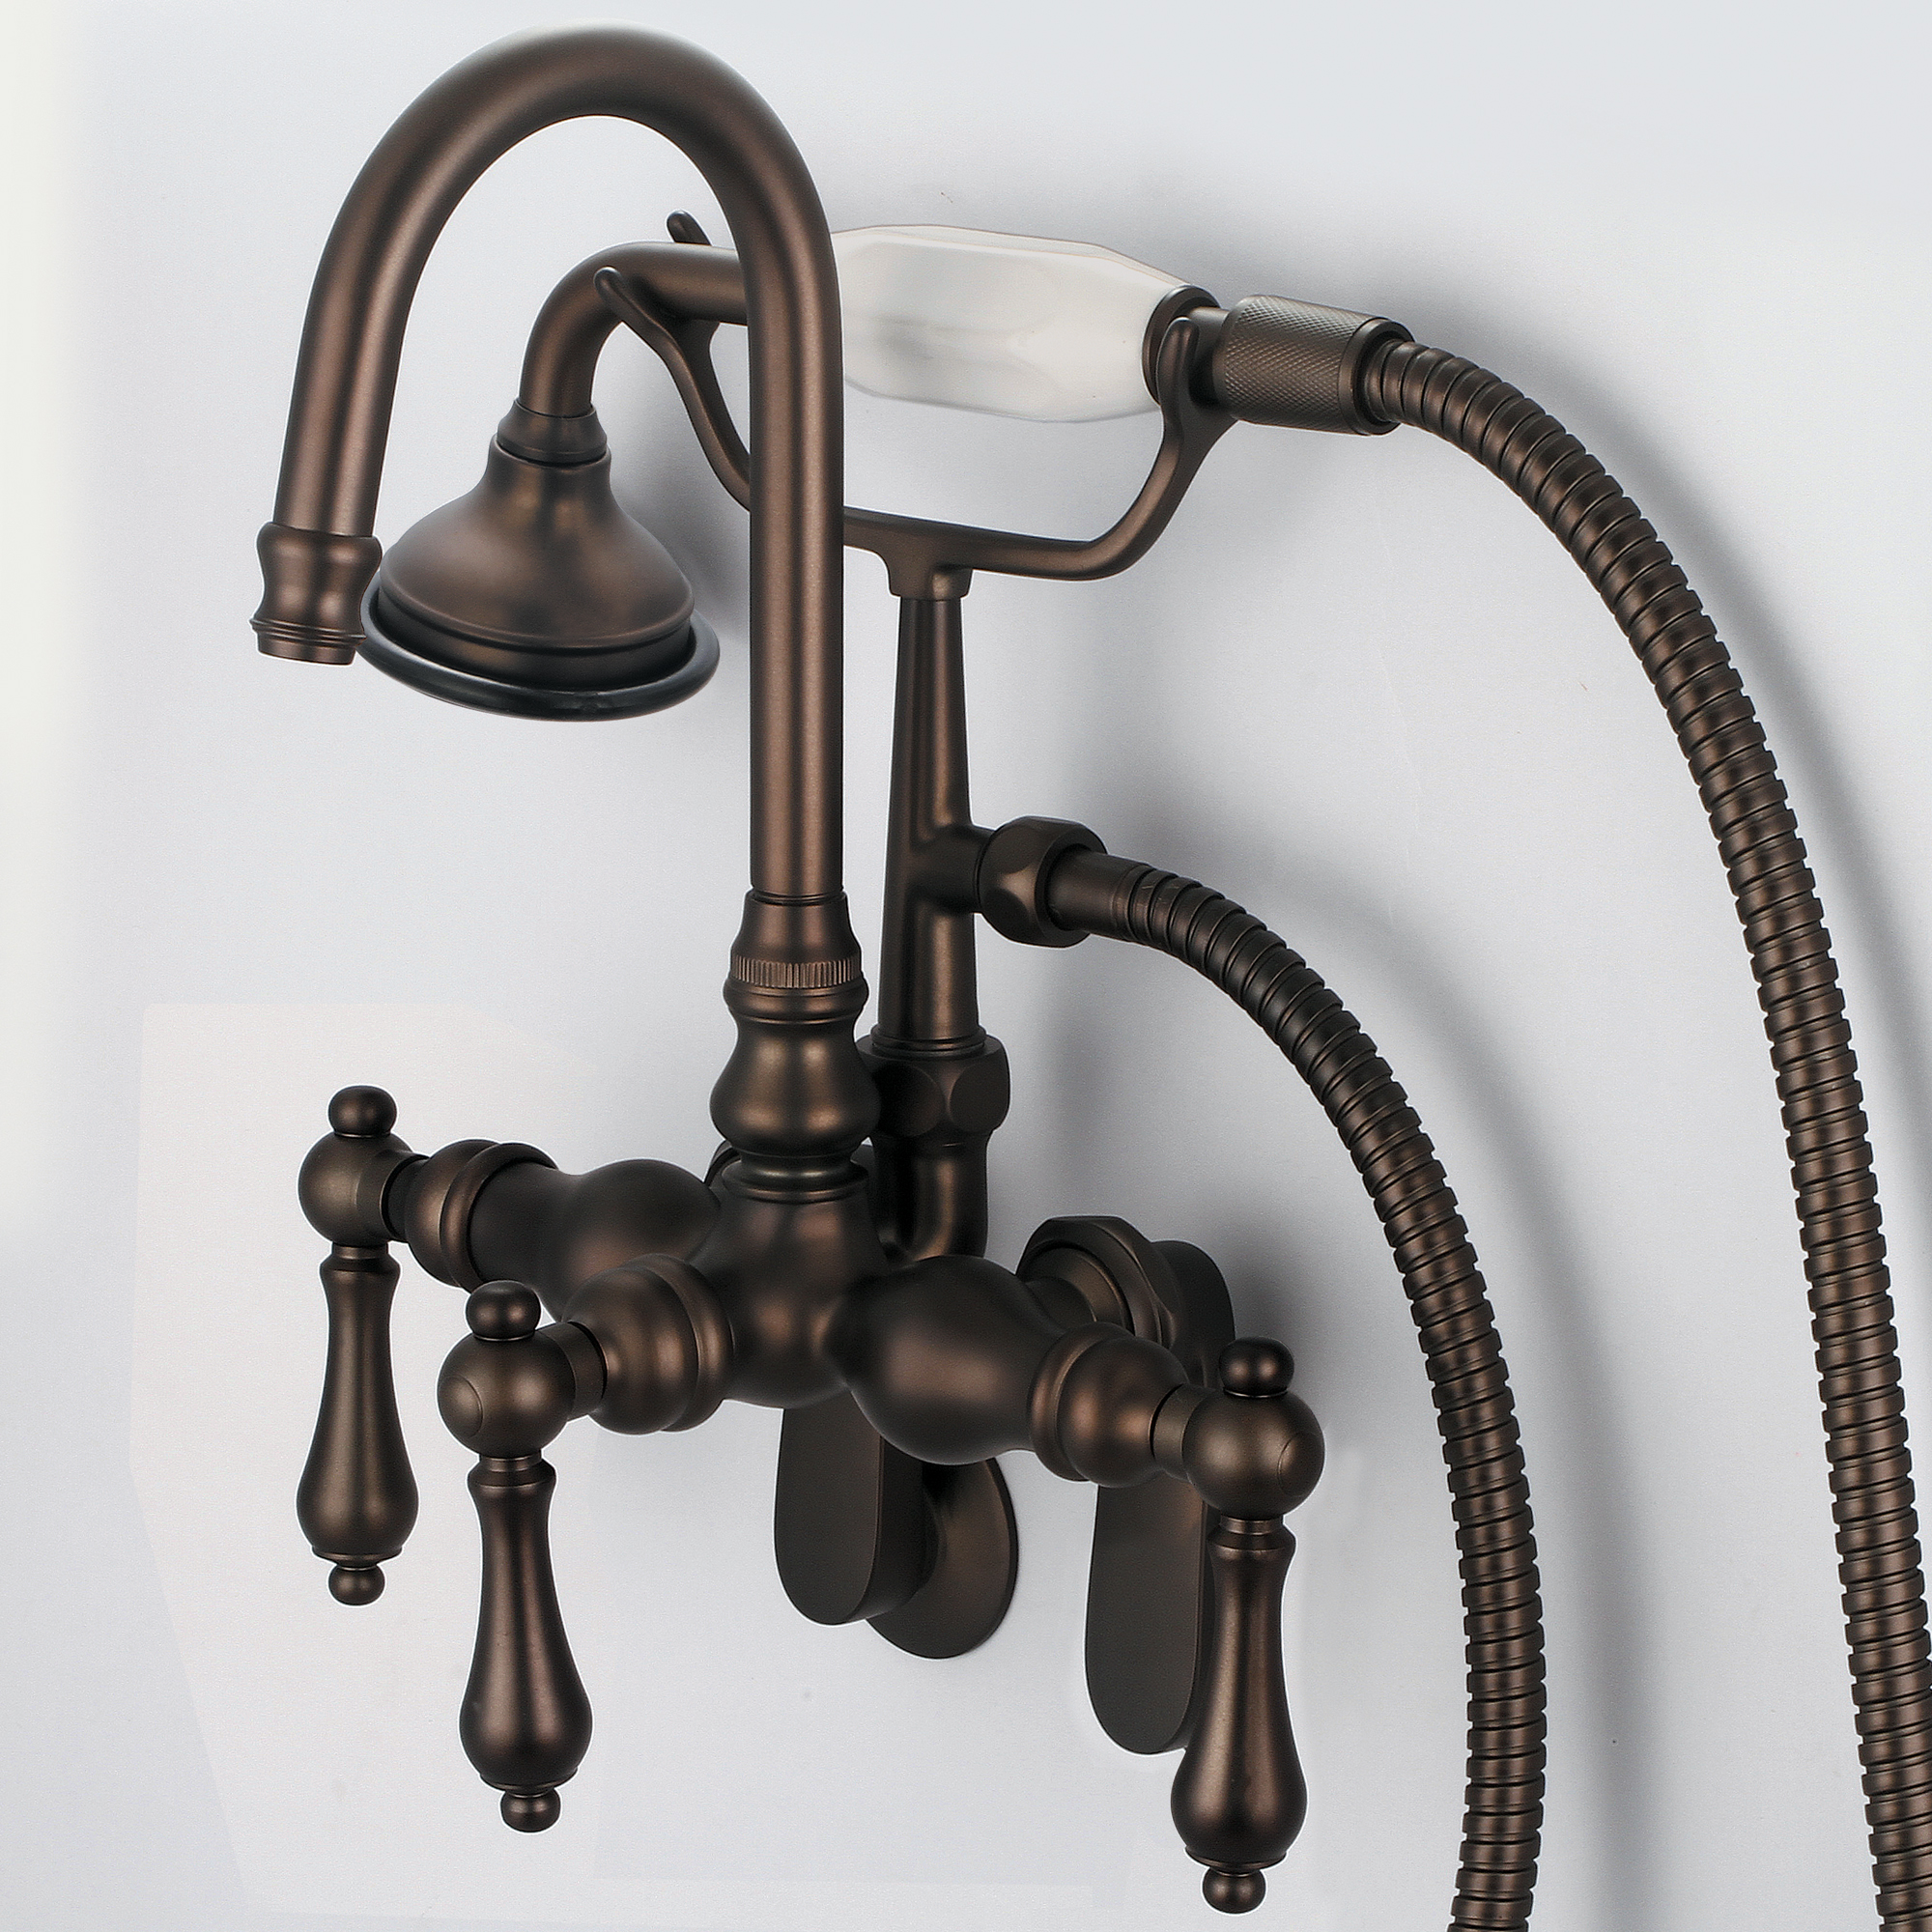 Vintage Classic Adjustable Spread Wall Mount Tub Faucet With Gooseneck Spout, Swivel Wall Connector & Handheld Shower in Oil-rubbed Bronze Finish Finish With Metal Lever Handles Without Labels